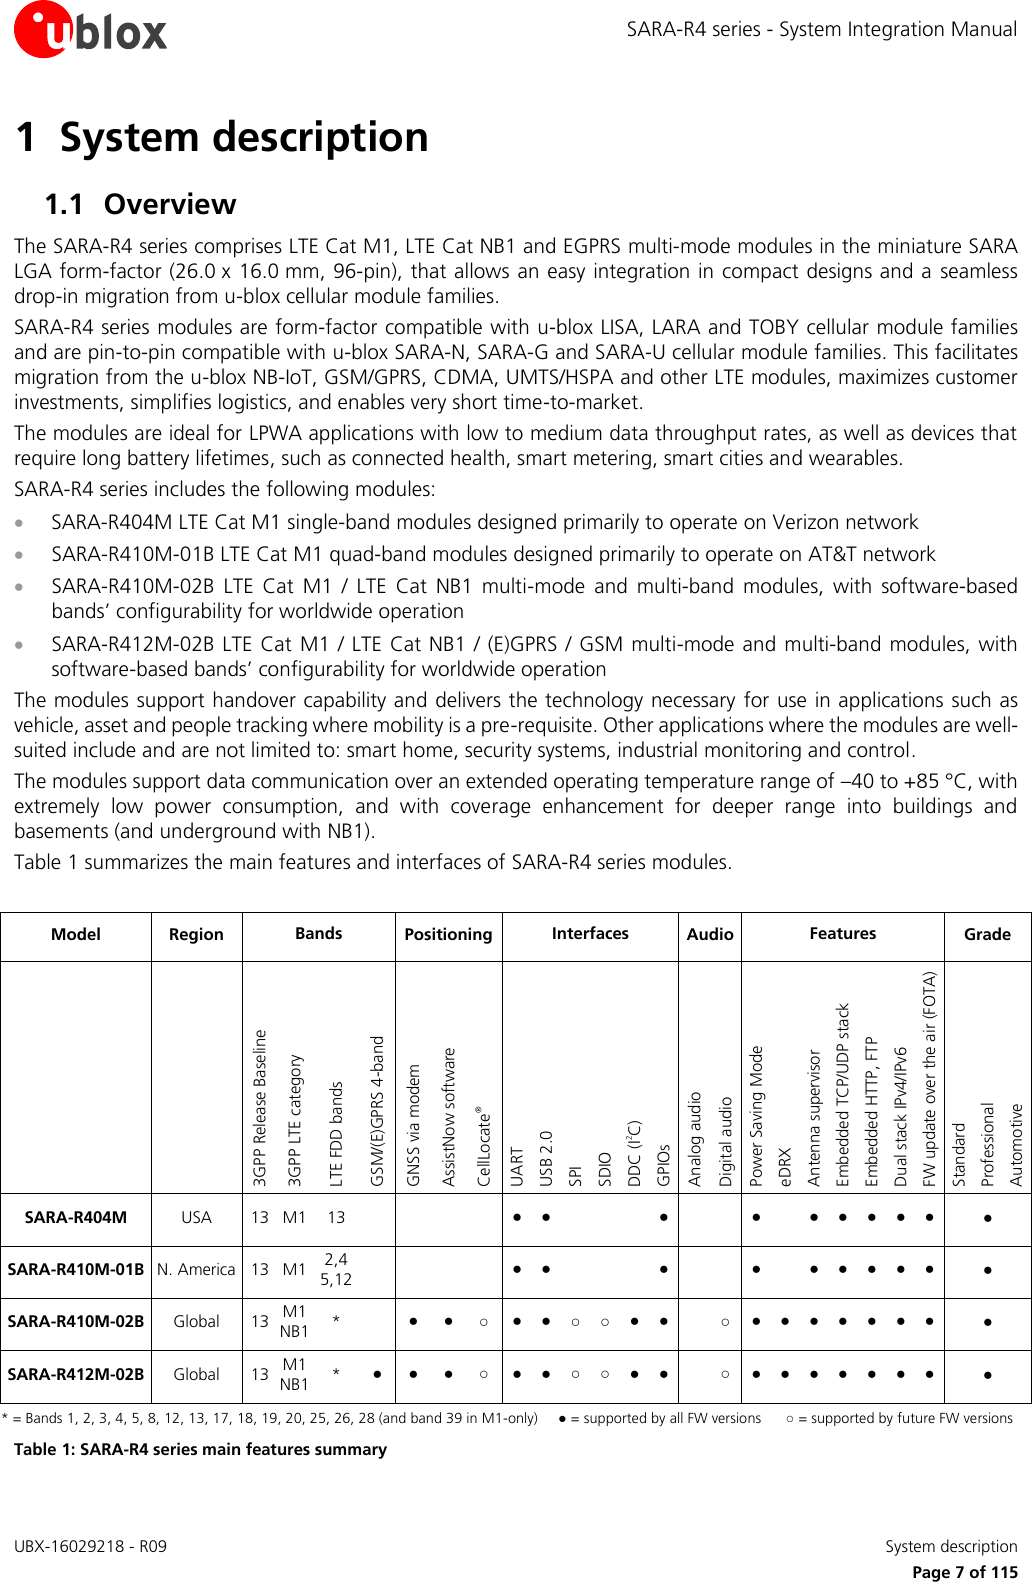 SARA-R4 series - System Integration Manual UBX-16029218 - R09    System description     Page 7 of 115 1 System description 1.1 Overview The SARA-R4 series comprises LTE Cat M1, LTE Cat NB1 and EGPRS multi-mode modules in the miniature SARA LGA form-factor (26.0 x 16.0 mm, 96-pin), that allows an easy integration in compact designs and a seamless drop-in migration from u-blox cellular module families.  SARA-R4 series modules are form-factor compatible with u-blox LISA, LARA and TOBY cellular module families and are pin-to-pin compatible with u-blox SARA-N, SARA-G and SARA-U cellular module families. This facilitates migration from the u-blox NB-IoT, GSM/GPRS, CDMA, UMTS/HSPA and other LTE modules, maximizes customer investments, simplifies logistics, and enables very short time-to-market. The modules are ideal for LPWA applications with low to medium data throughput rates, as well as devices that require long battery lifetimes, such as connected health, smart metering, smart cities and wearables. SARA-R4 series includes the following modules:  SARA-R404M LTE Cat M1 single-band modules designed primarily to operate on Verizon network  SARA-R410M-01B LTE Cat M1 quad-band modules designed primarily to operate on AT&amp;T network  SARA-R410M-02B  LTE  Cat  M1  /  LTE  Cat  NB1  multi-mode  and  multi-band  modules,  with  software-based bands’ configurability for worldwide operation  SARA-R412M-02B LTE  Cat  M1  / LTE Cat NB1 / (E)GPRS / GSM multi-mode  and  multi-band modules, with software-based bands’ configurability for worldwide operation The modules support handover capability and delivers the technology necessary for use in applications such as vehicle, asset and people tracking where mobility is a pre-requisite. Other applications where the modules are well-suited include and are not limited to: smart home, security systems, industrial monitoring and control. The modules support data communication over an extended operating temperature range of –40 to +85 °C, with extremely  low  power  consumption,  and  with  coverage  enhancement  for  deeper  range  into  buildings  and basements (and underground with NB1).  Table 1 summarizes the main features and interfaces of SARA-R4 series modules.  Model Region Bands Positioning Interfaces Audio Features Grade   3GPP Release Baseline  3GPP LTE category LTE FDD bands GSM/(E)GPRS 4-band GNSS via modem AssistNow software CellLocate® UART USB 2.0 SPI SDIO DDC (I2C) GPIOs Analog audio Digital audio  Power Saving Mode eDRX Antenna supervisor Embedded TCP/UDP stack Embedded HTTP, FTP Dual stack IPv4/IPv6 FW update over the air (FOTA) Standard Professional Automotive SARA-R404M USA 13 M1 13     ● ●    ●   ●  ● ● ● ● ●  ●  SARA-R410M-01B N. America 13 M1 2,4 5,12     ● ●    ●   ●  ● ● ● ● ●  ●  SARA-R410M-02B Global 13 M1 NB1 *  ● ● ○ ● ● ○ ○ ● ●  ○ ● ● ● ● ● ● ●  ●  SARA-R412M-02B Global 13 M1 NB1 * ● ● ● ○ ● ● ○ ○ ● ●  ○ ● ● ● ● ● ● ●  ●  * = Bands 1, 2, 3, 4, 5, 8, 12, 13, 17, 18, 19, 20, 25, 26, 28 (and band 39 in M1-only)     ● = supported by all FW versions      ○ = supported by future FW versions Table 1: SARA-R4 series main features summary 